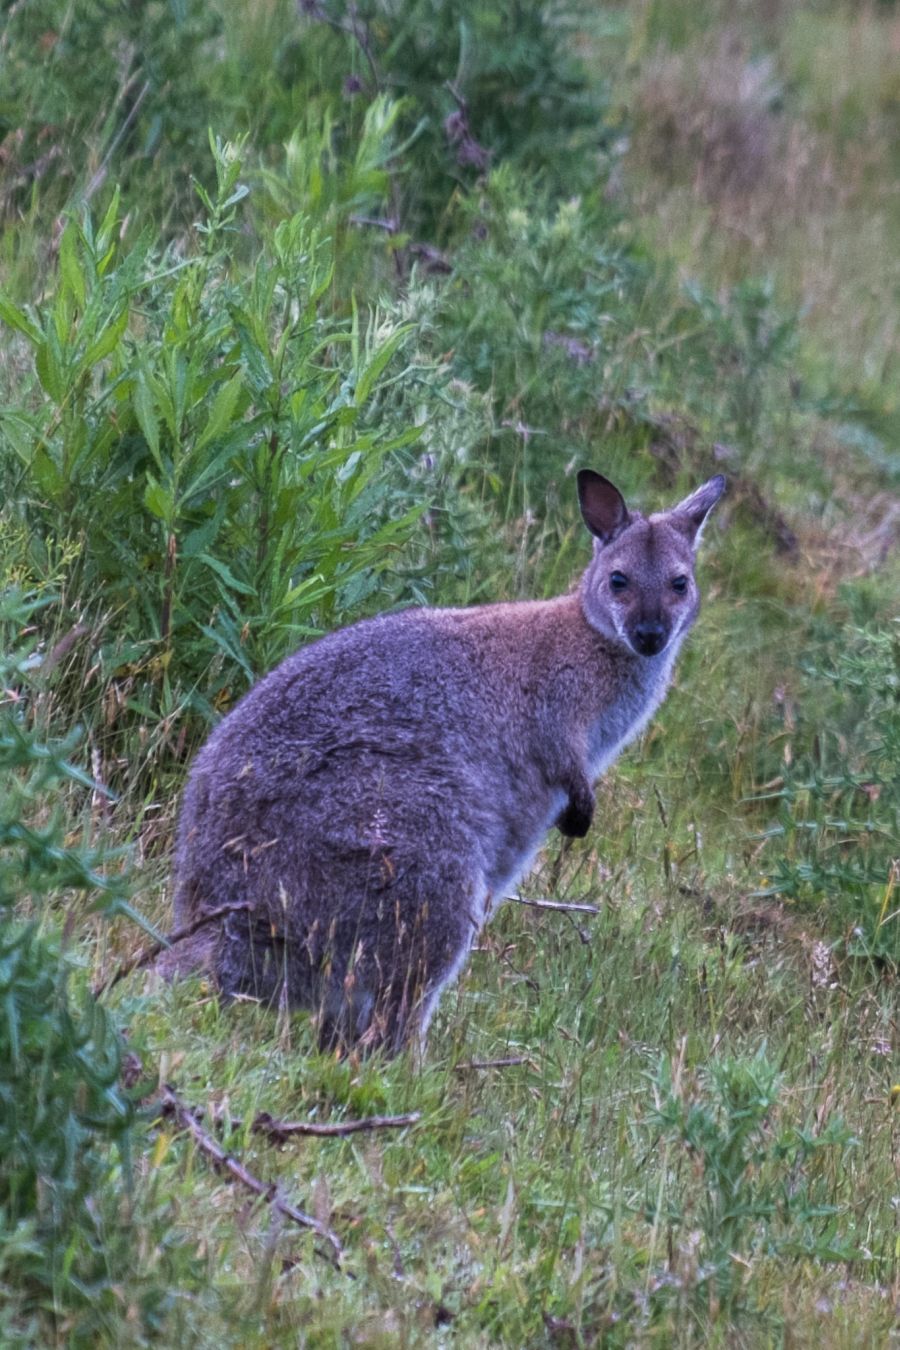 Another wallaby